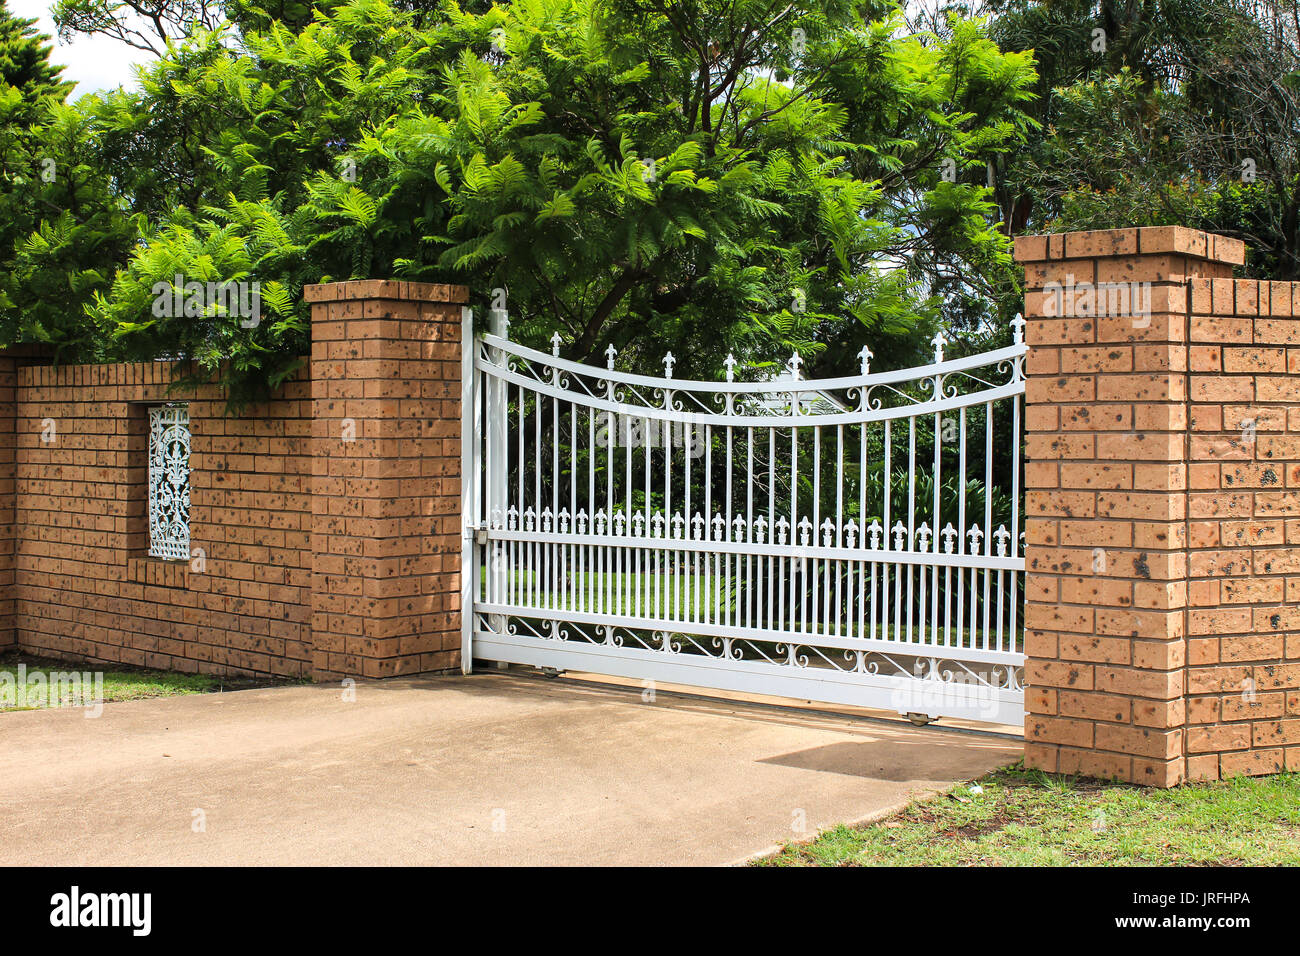 Metal driveway entrance gates set in brick fence with garden trees in background Stock Photo